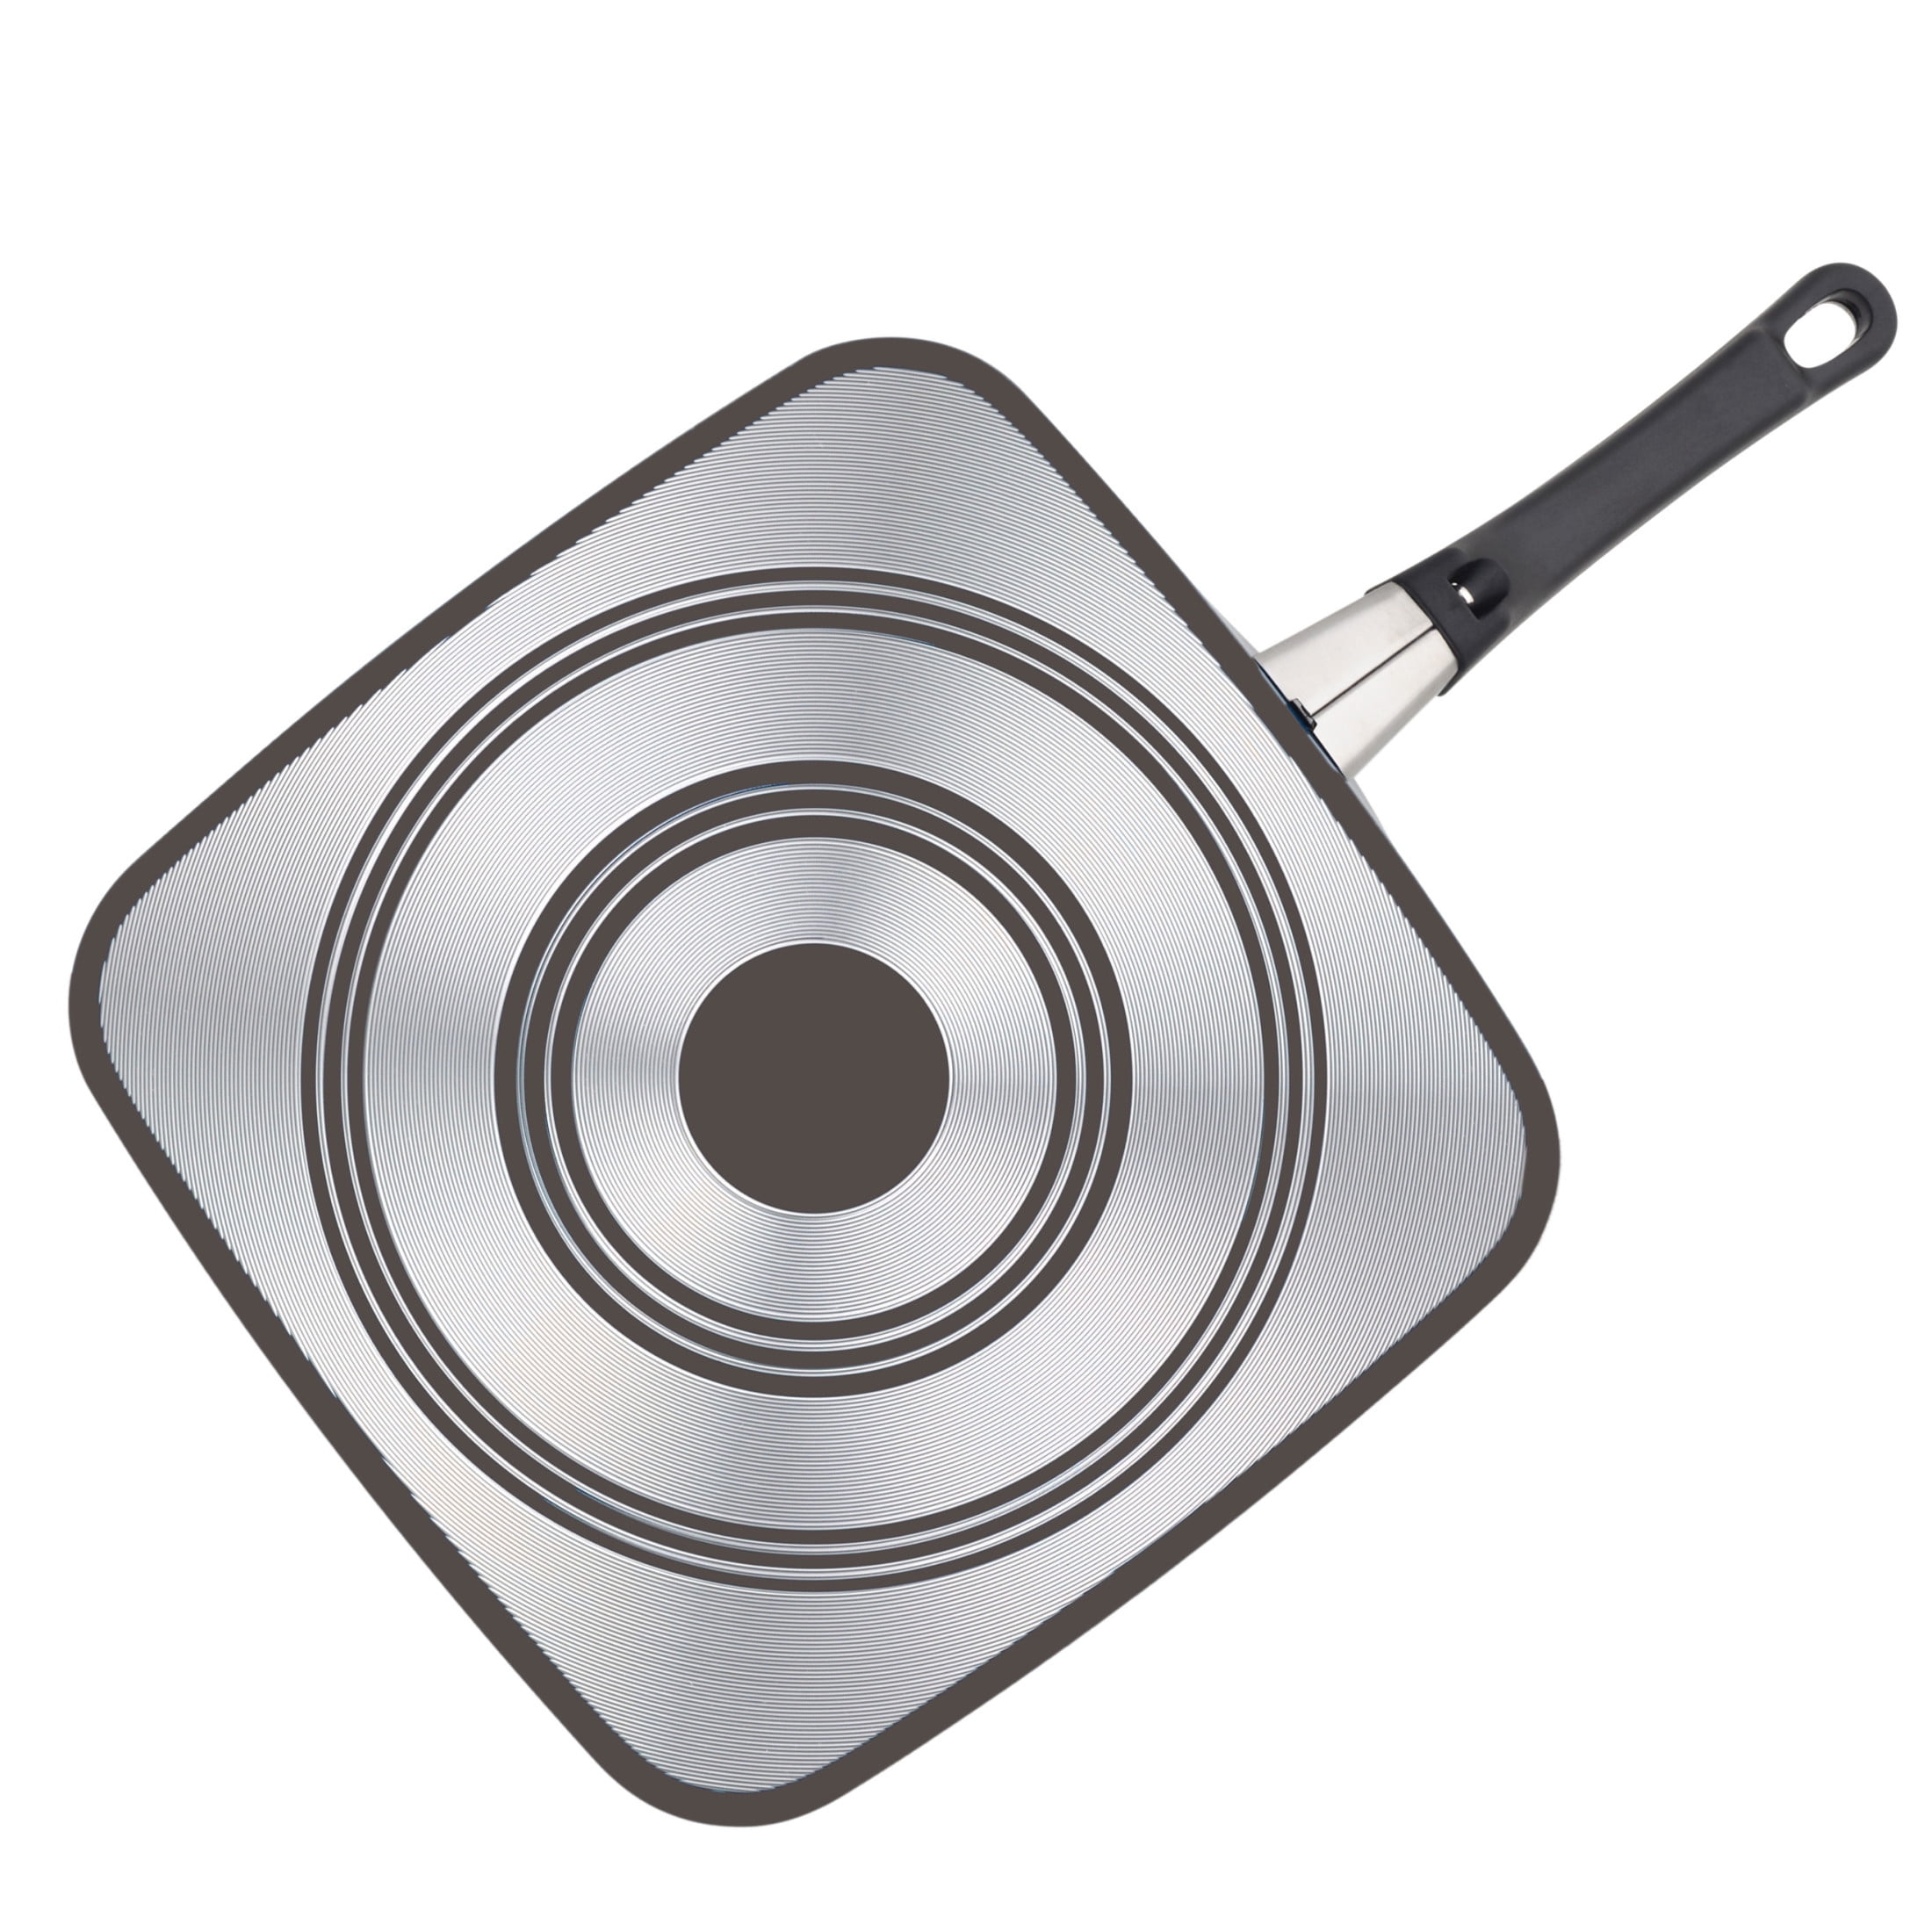 Gourmet Chef JL-2801 Non-Stick Griddle, 11-Inch – ATH Import